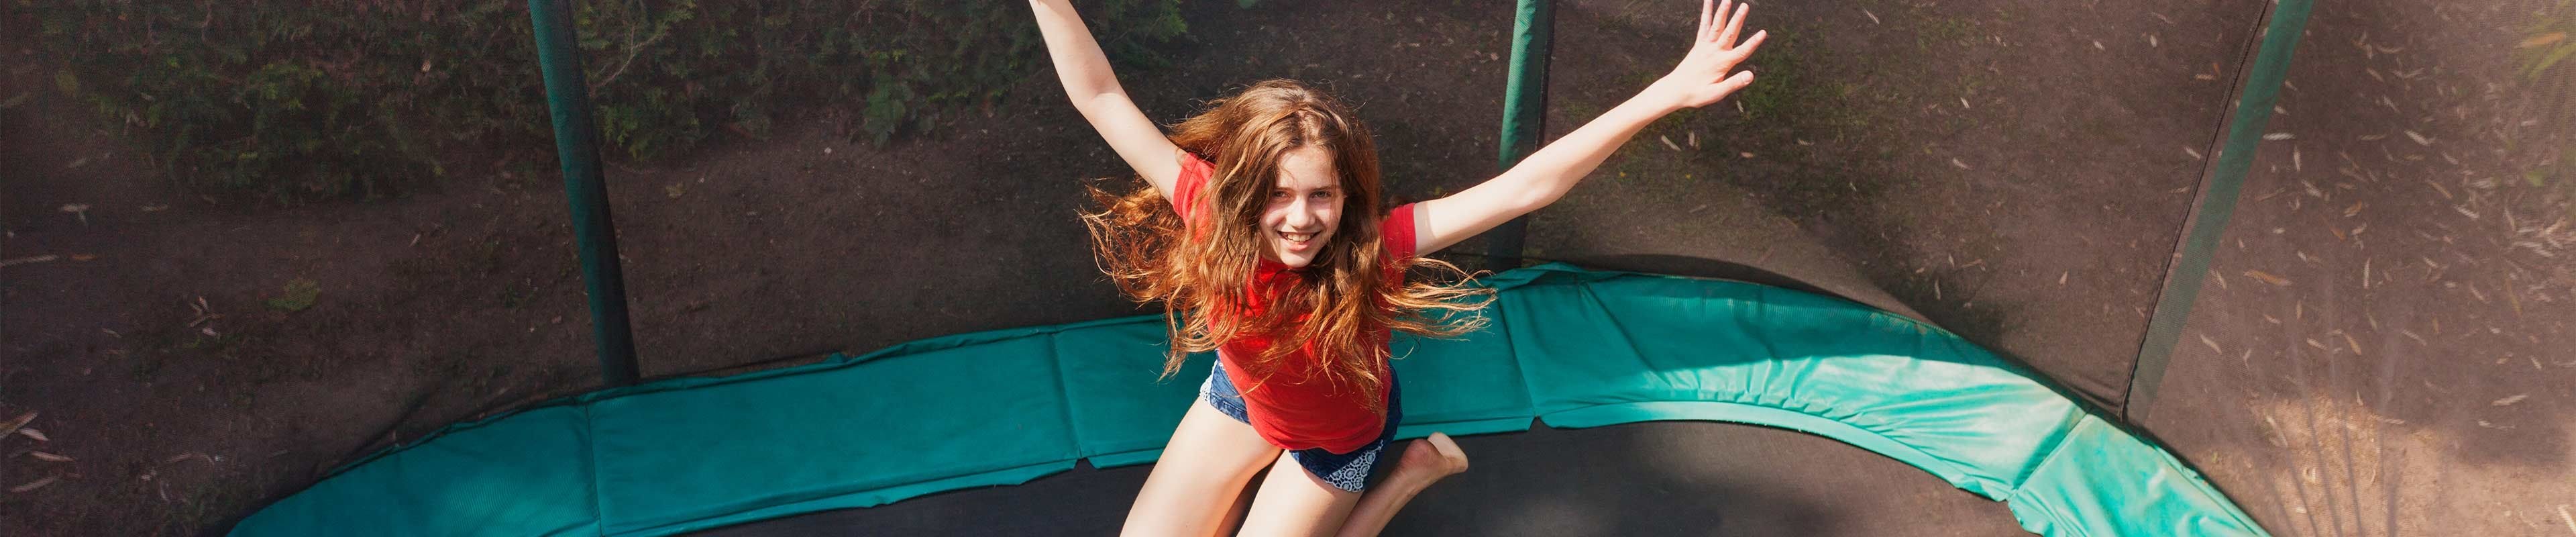 A little girl jumps safely on a trampoline.